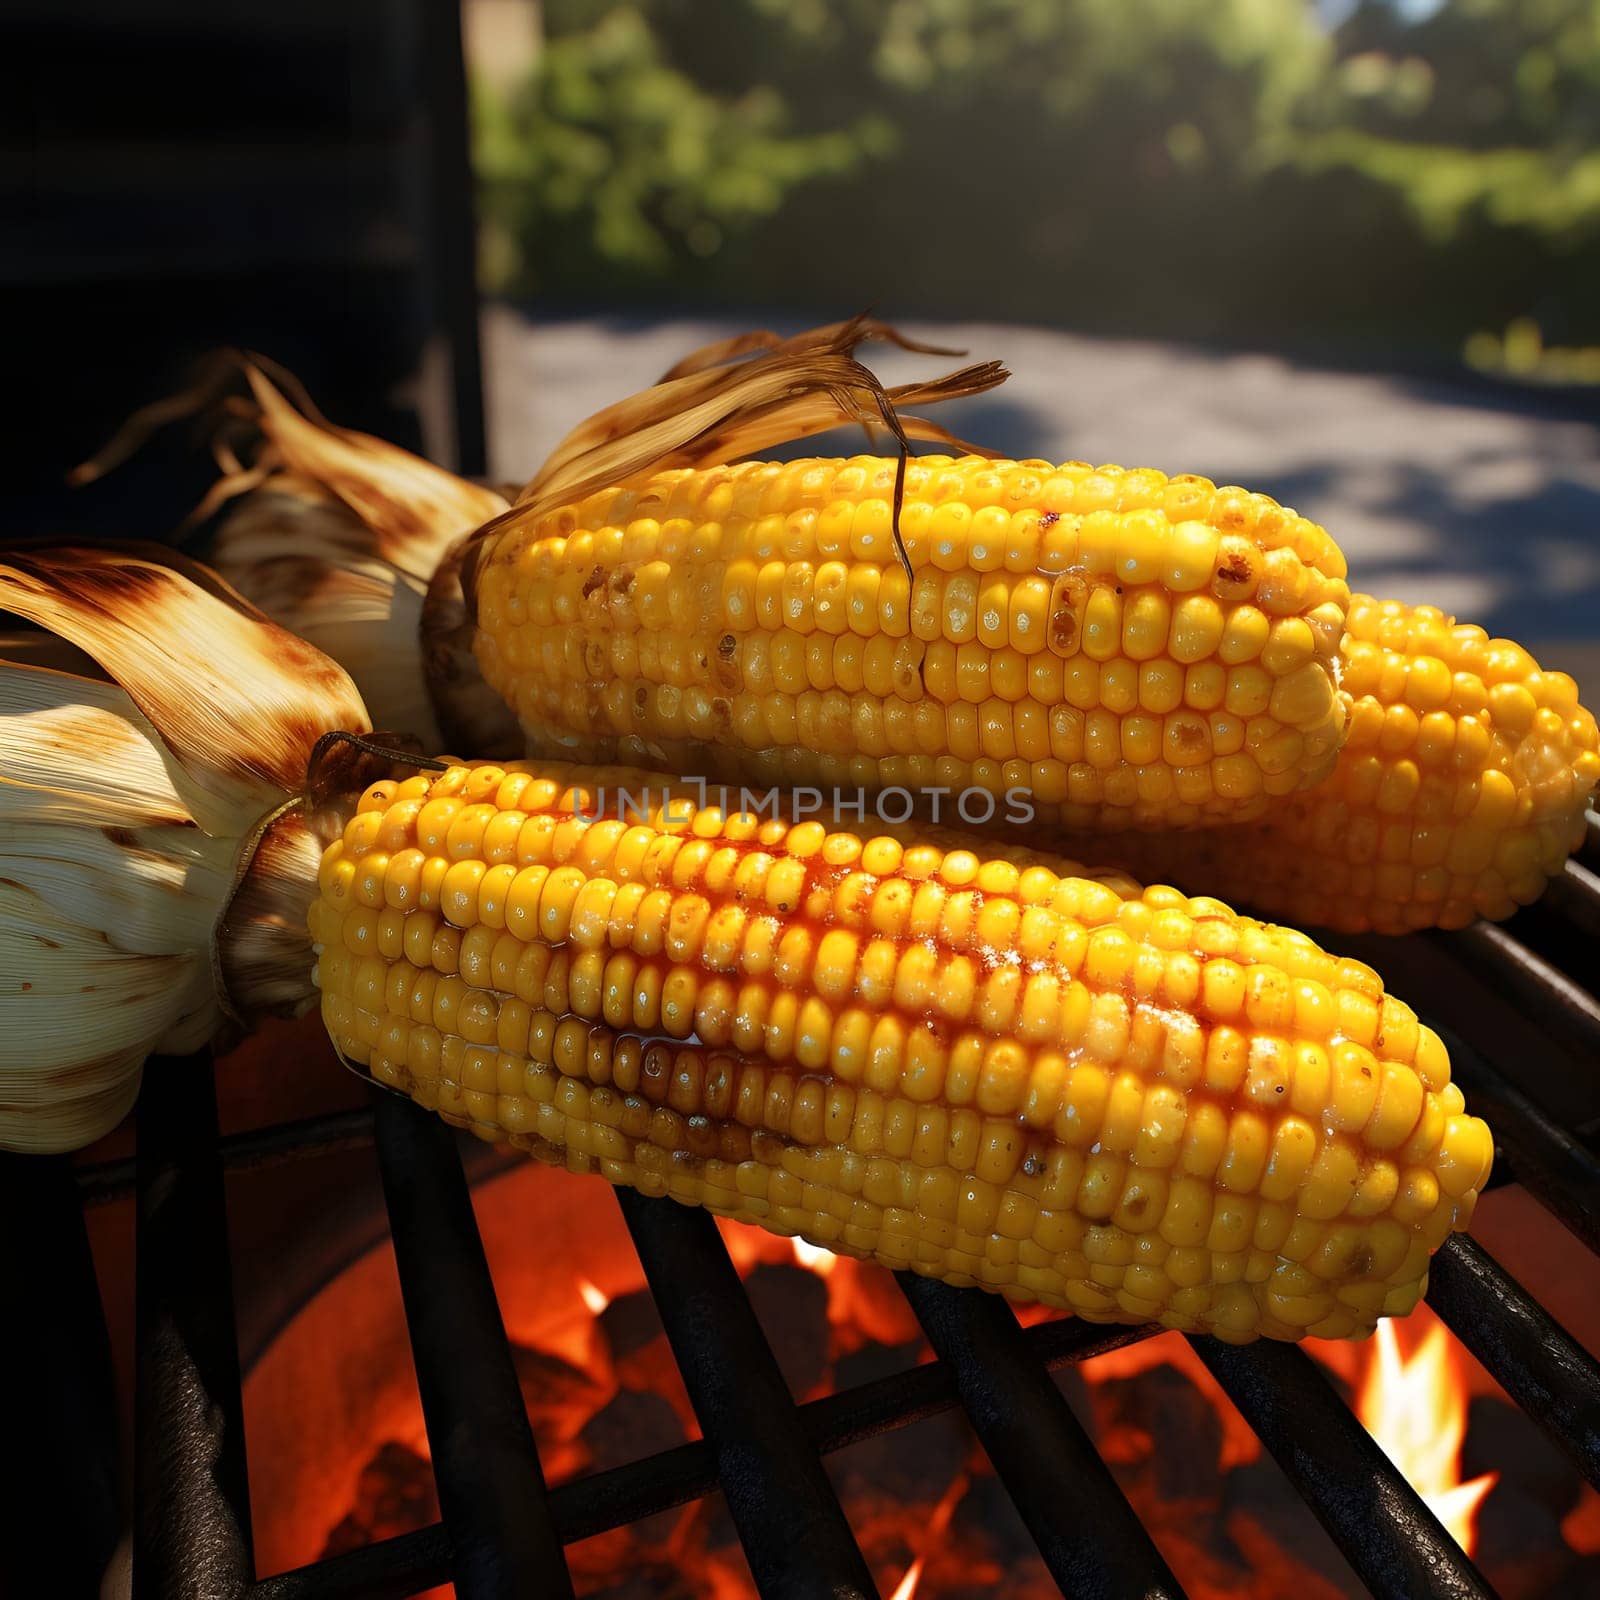 Yellow corn cobs toasted on the grill. Corn as a dish of thanksgiving for the harvest. An atmosphere of joy and celebration.